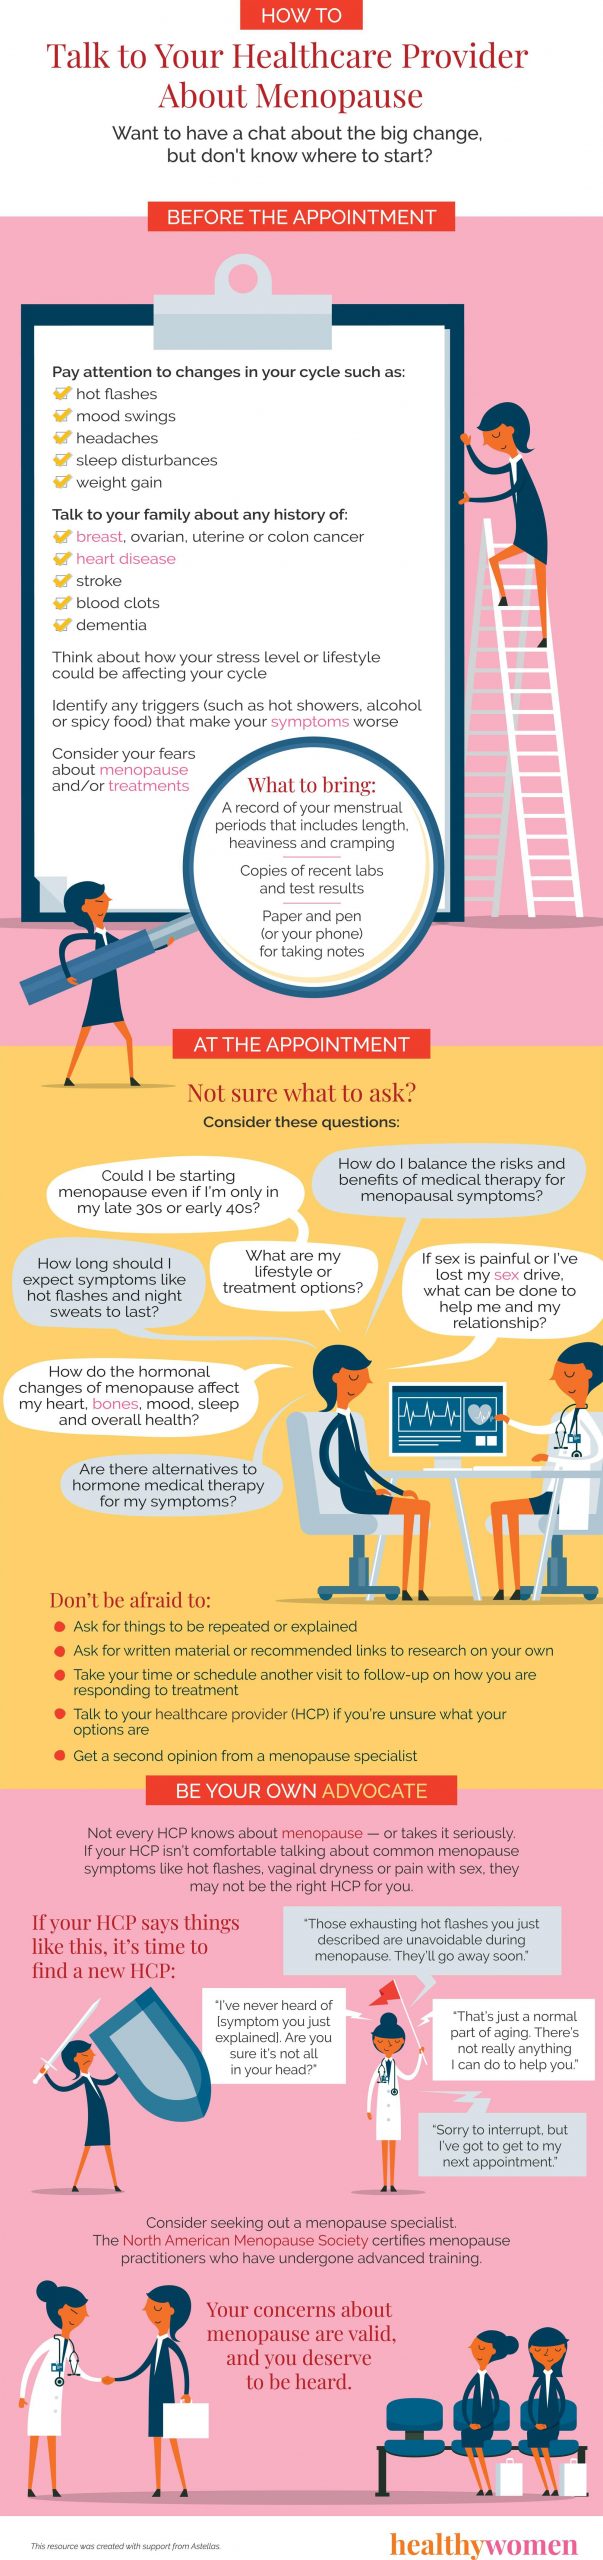 Infographic How to Talk to Your Healthcare Provider About Menopause. Click the image to open the PDF